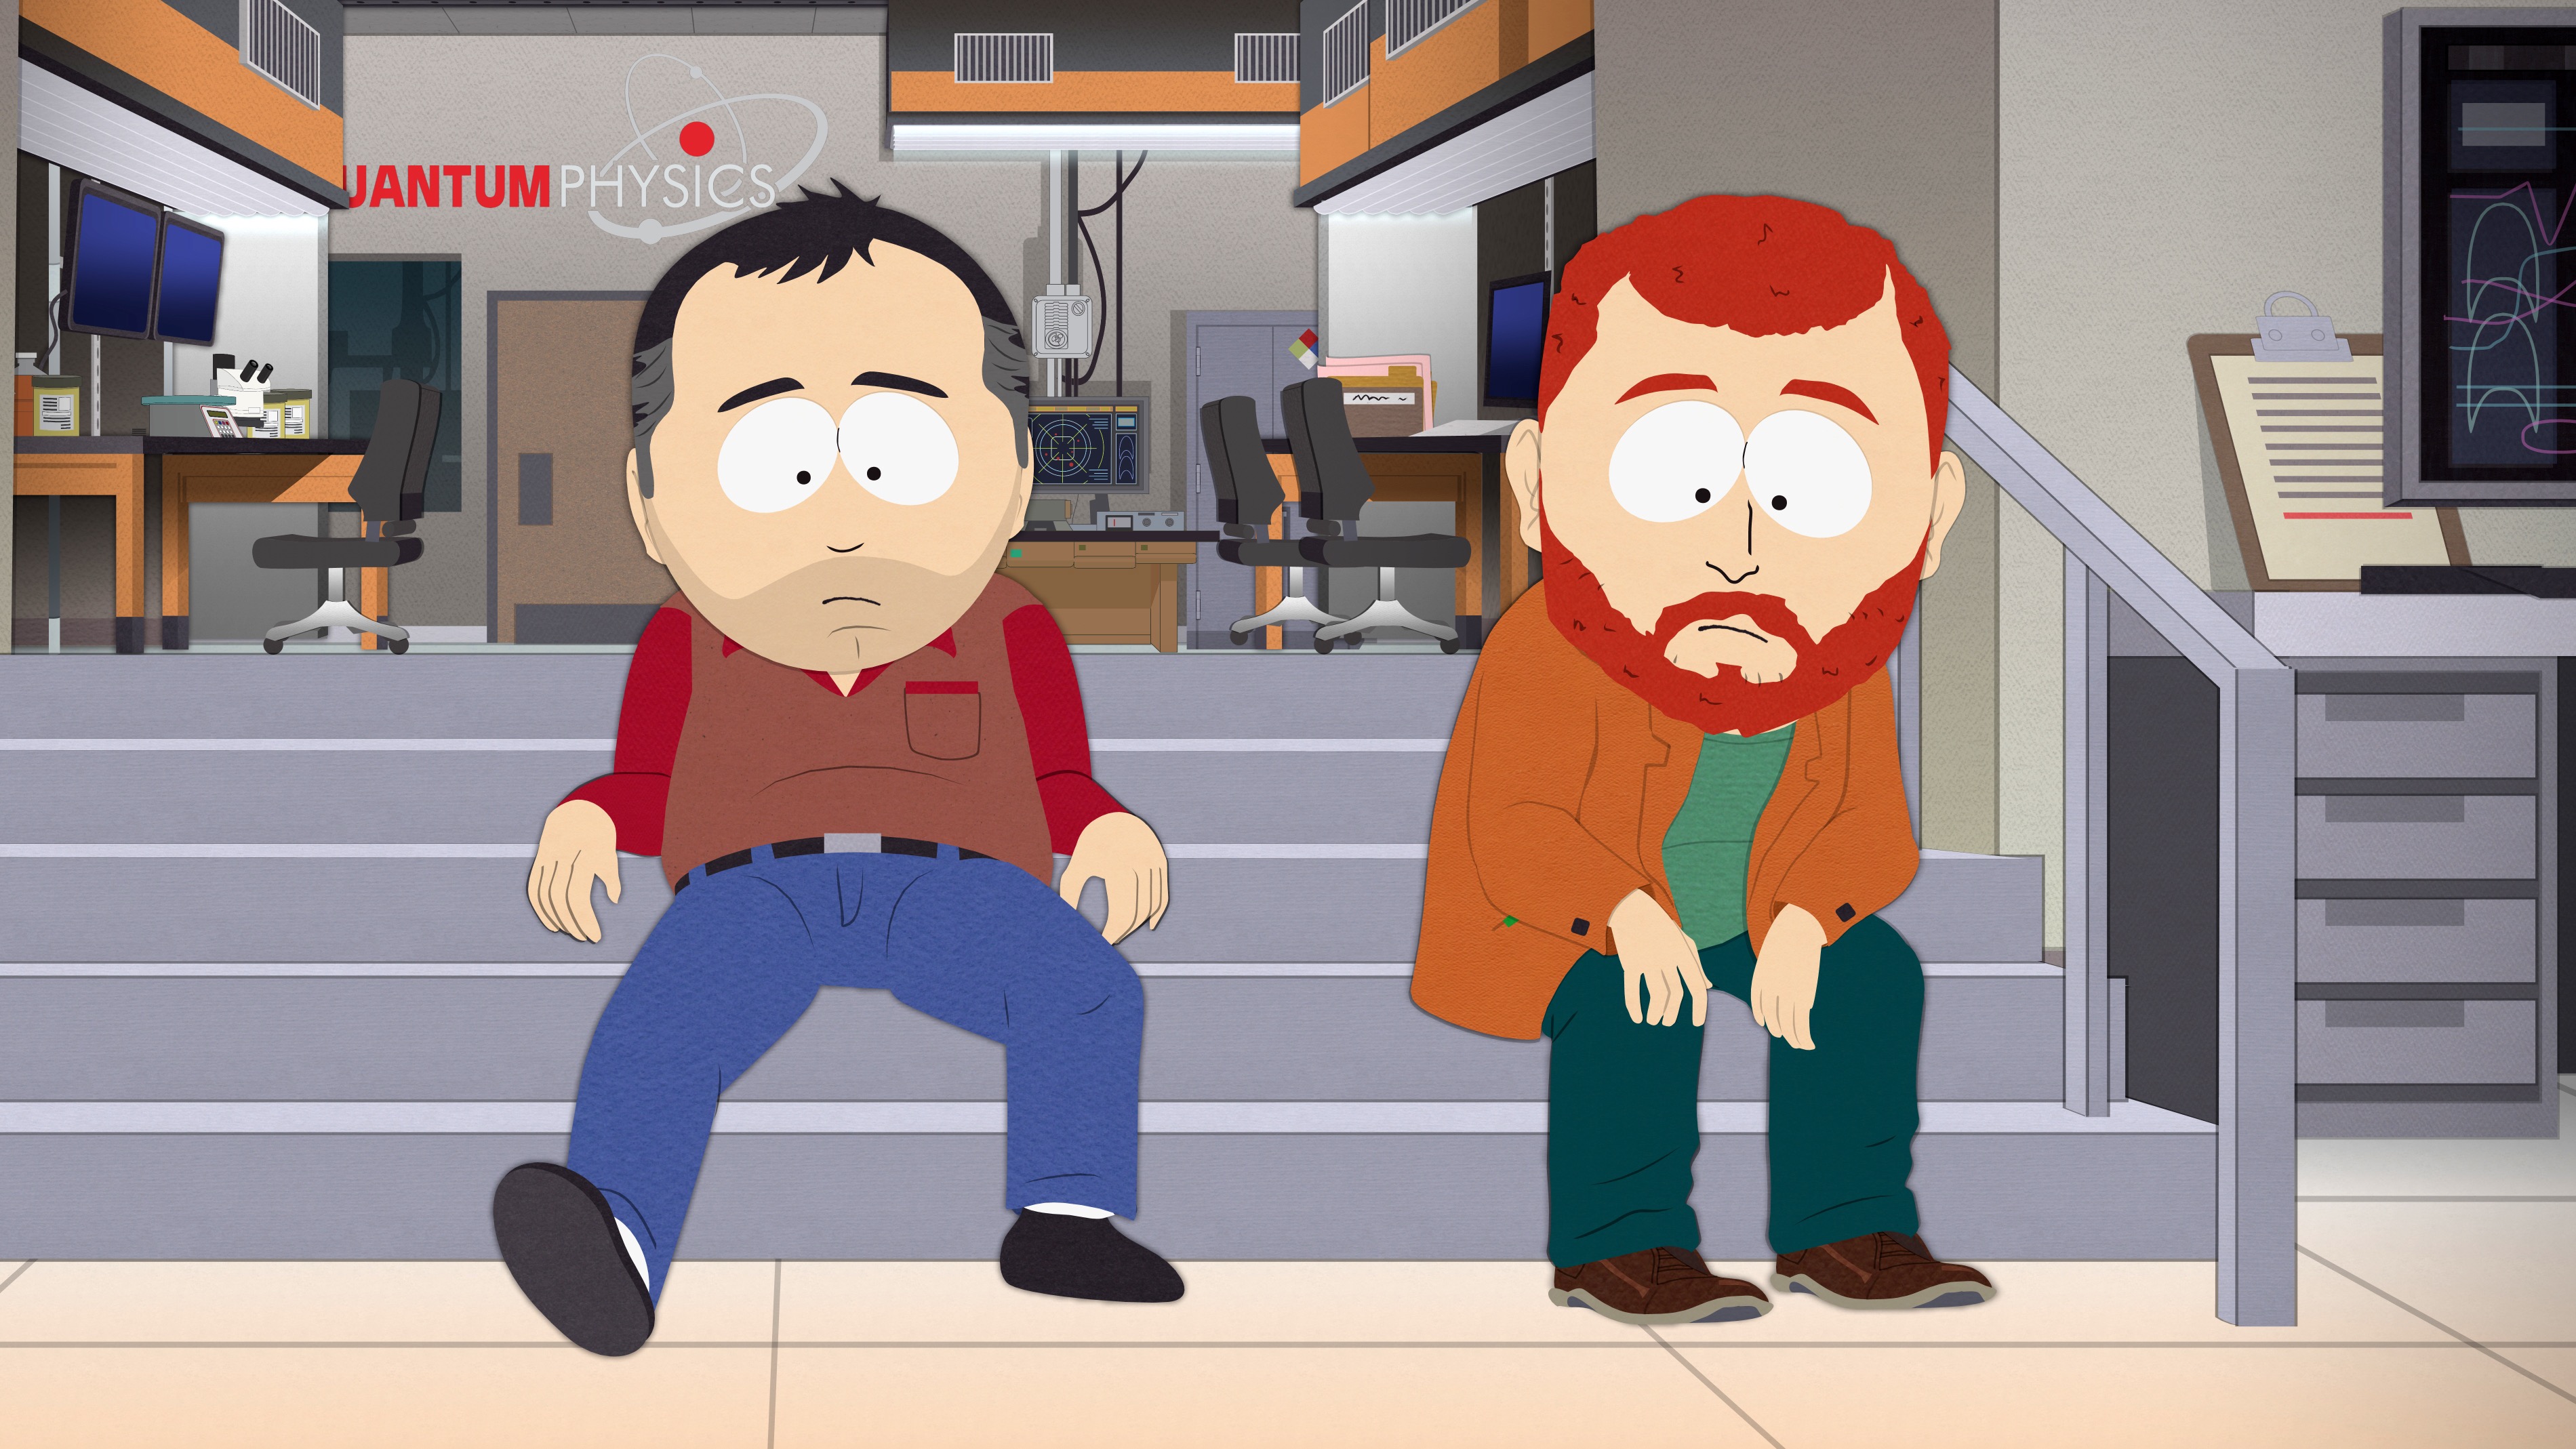 South Park - South Park updated their cover photo.